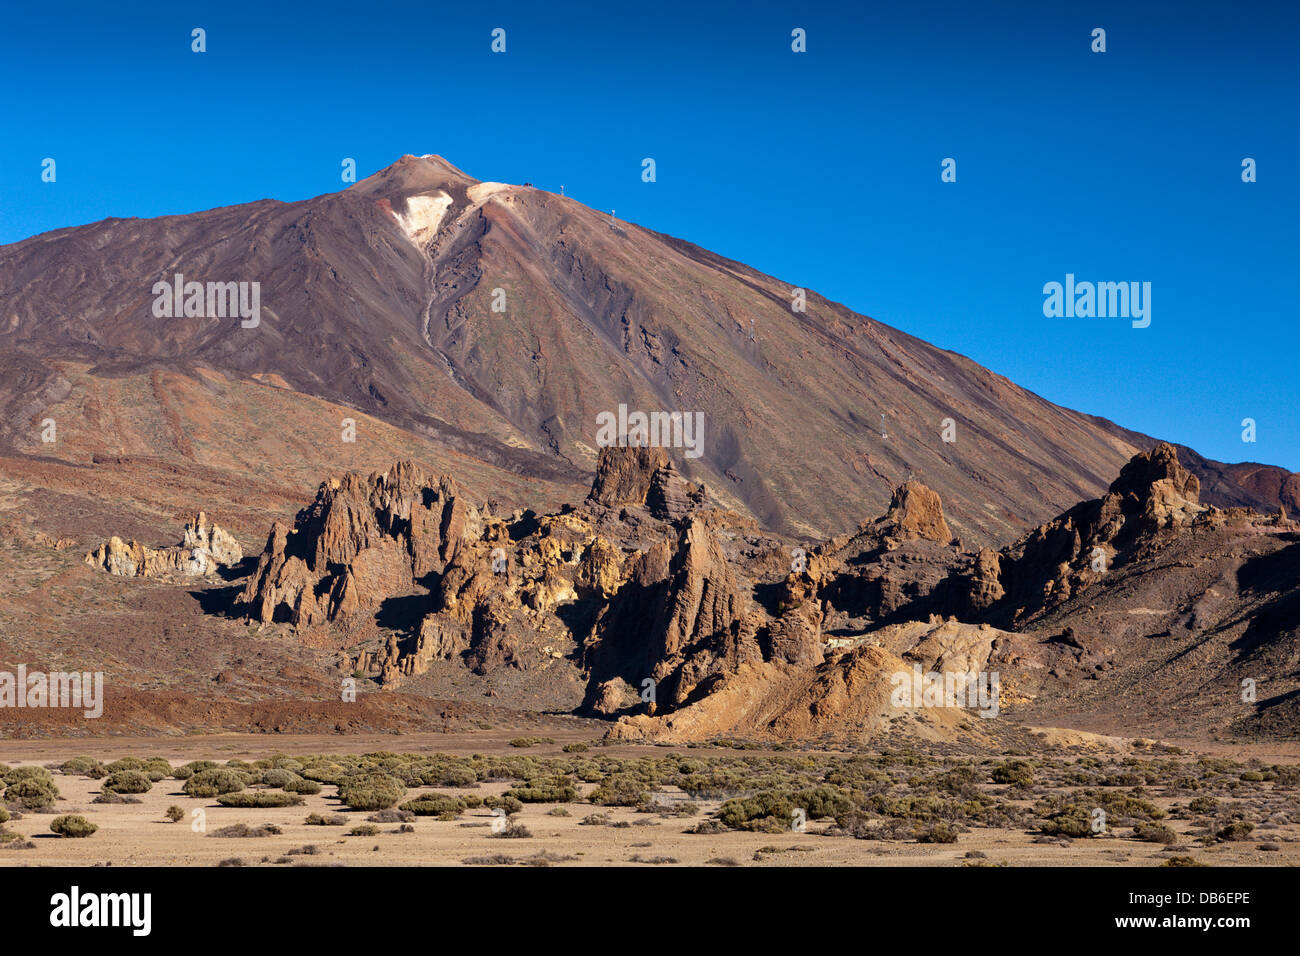 Rock Formation Roques de Garcia at Teide National Park, Tenerife, Canary Islands, Spain Stock Photo